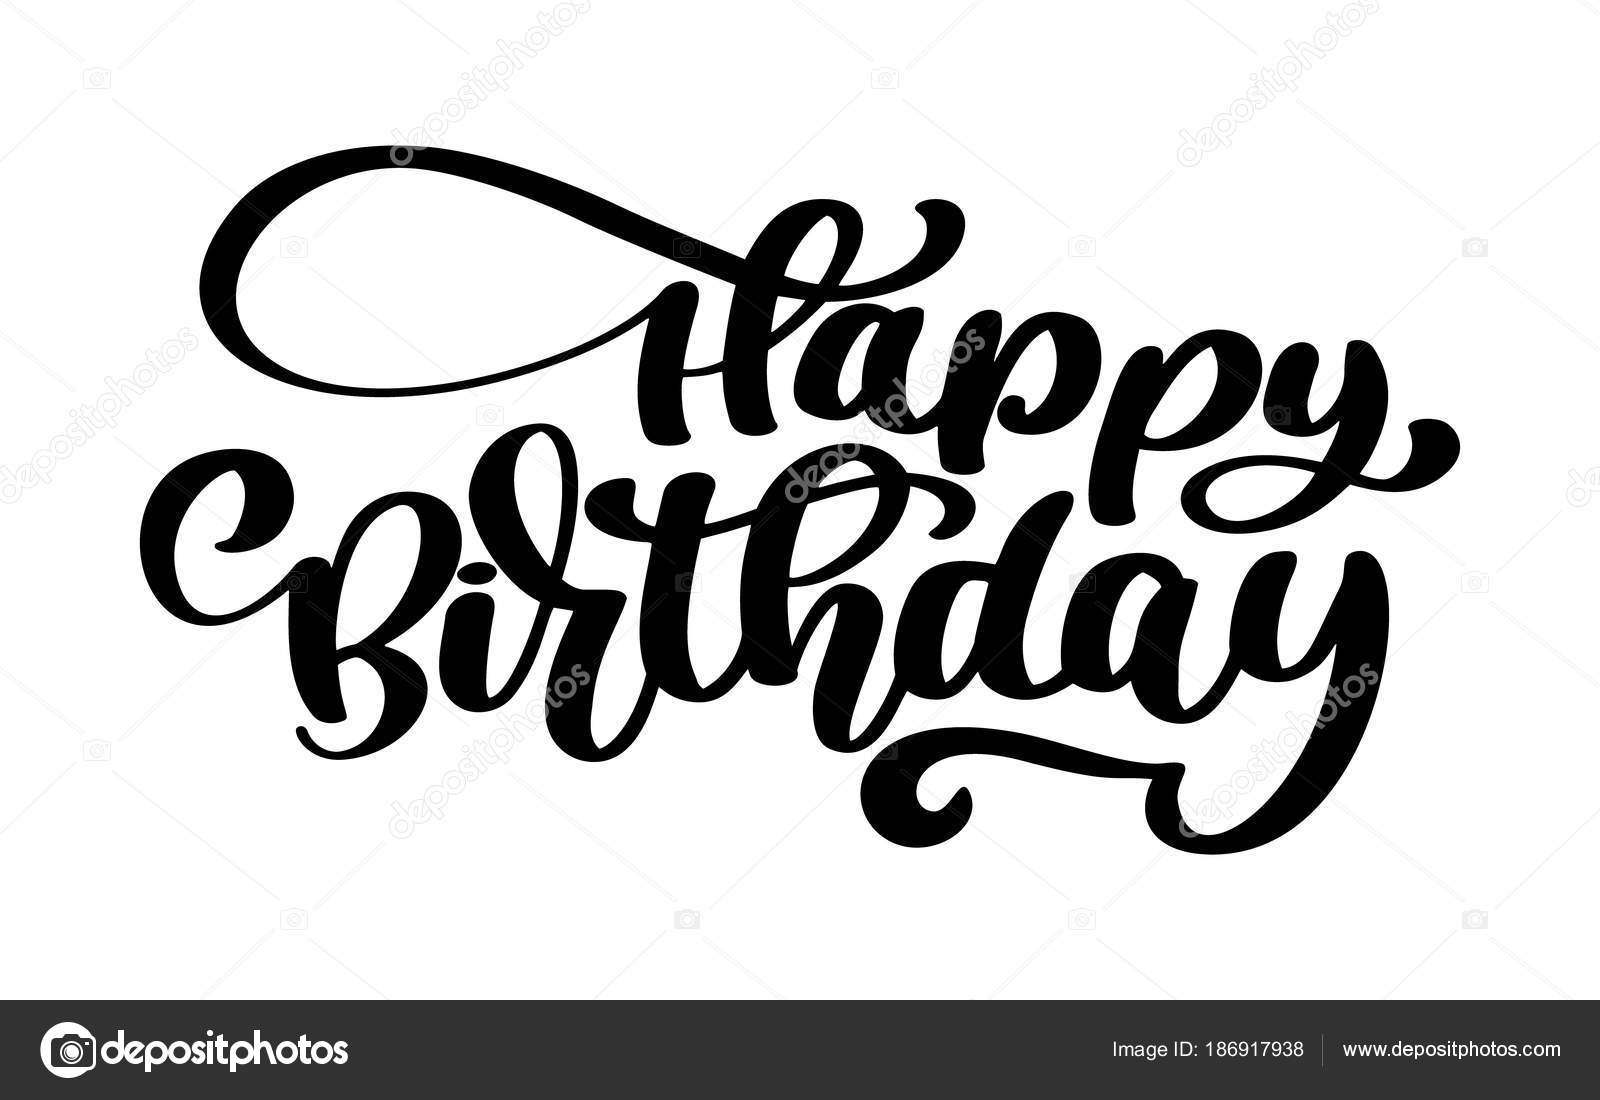 Download Happy Birthday Hand drawn text phrase. Calligraphy ...